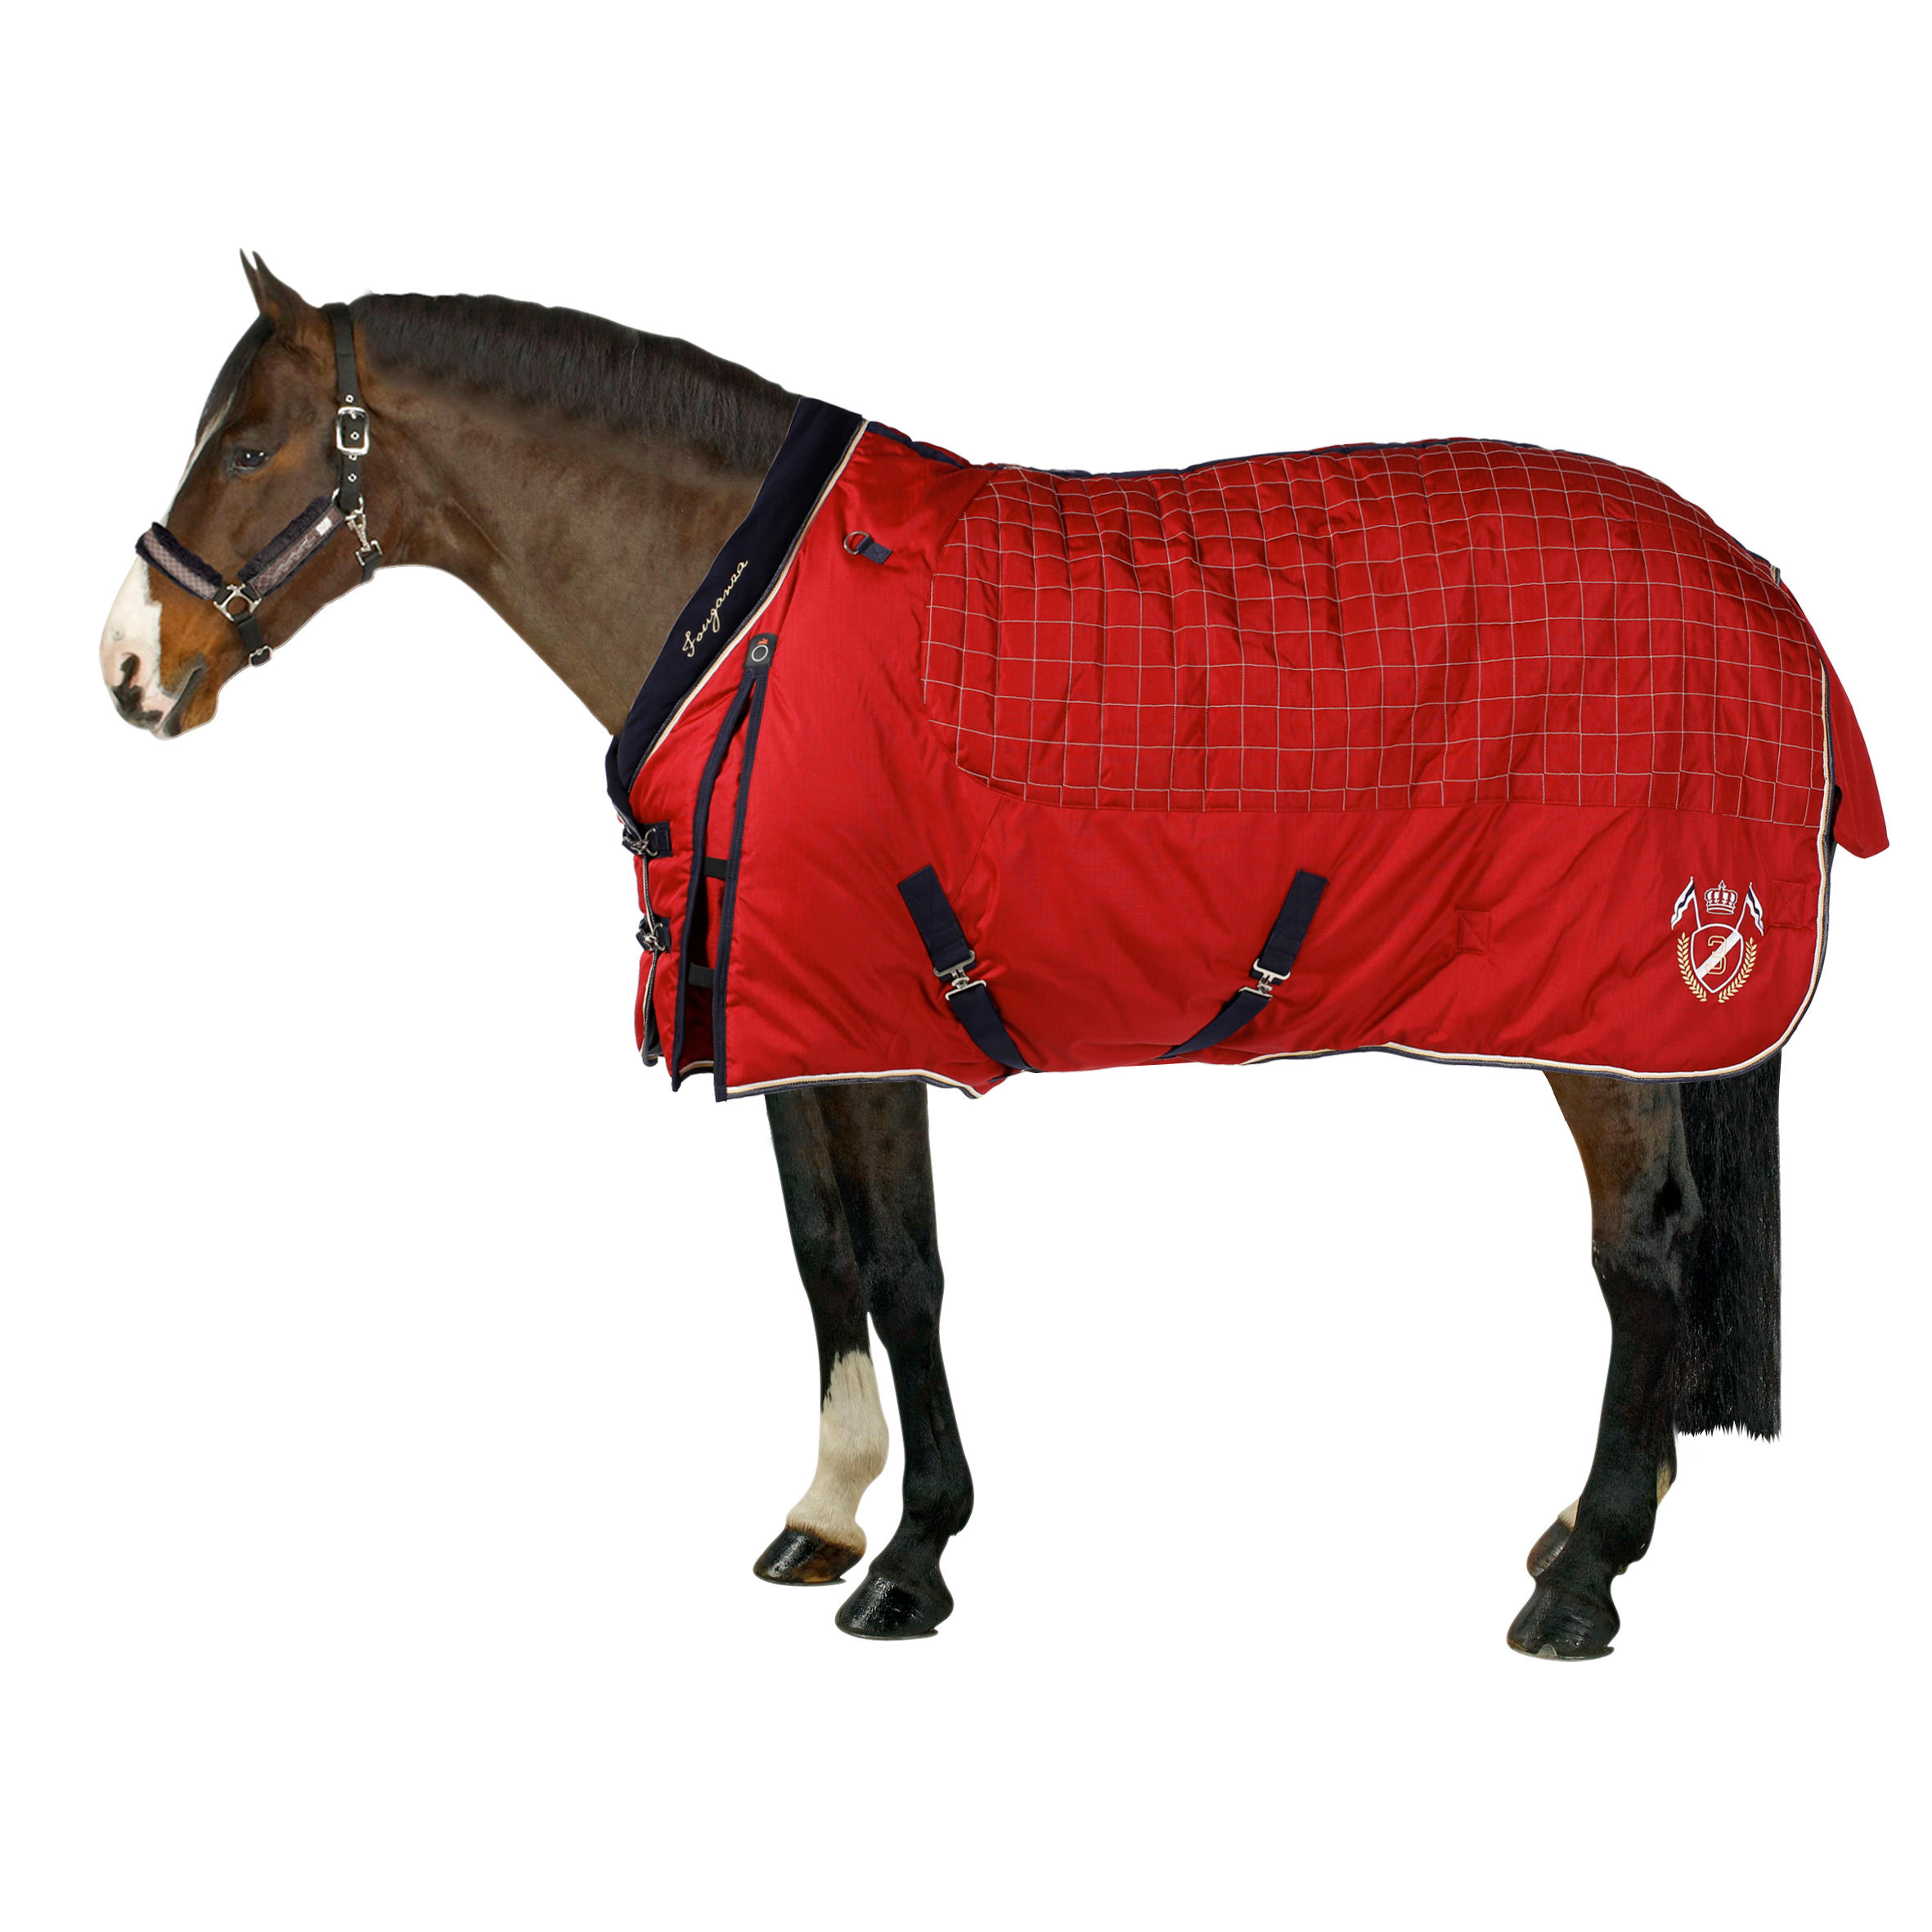 FOUGANZA Stable 400 "3" Horse Riding Stable Rug for Horse or Pony - Red/Navy